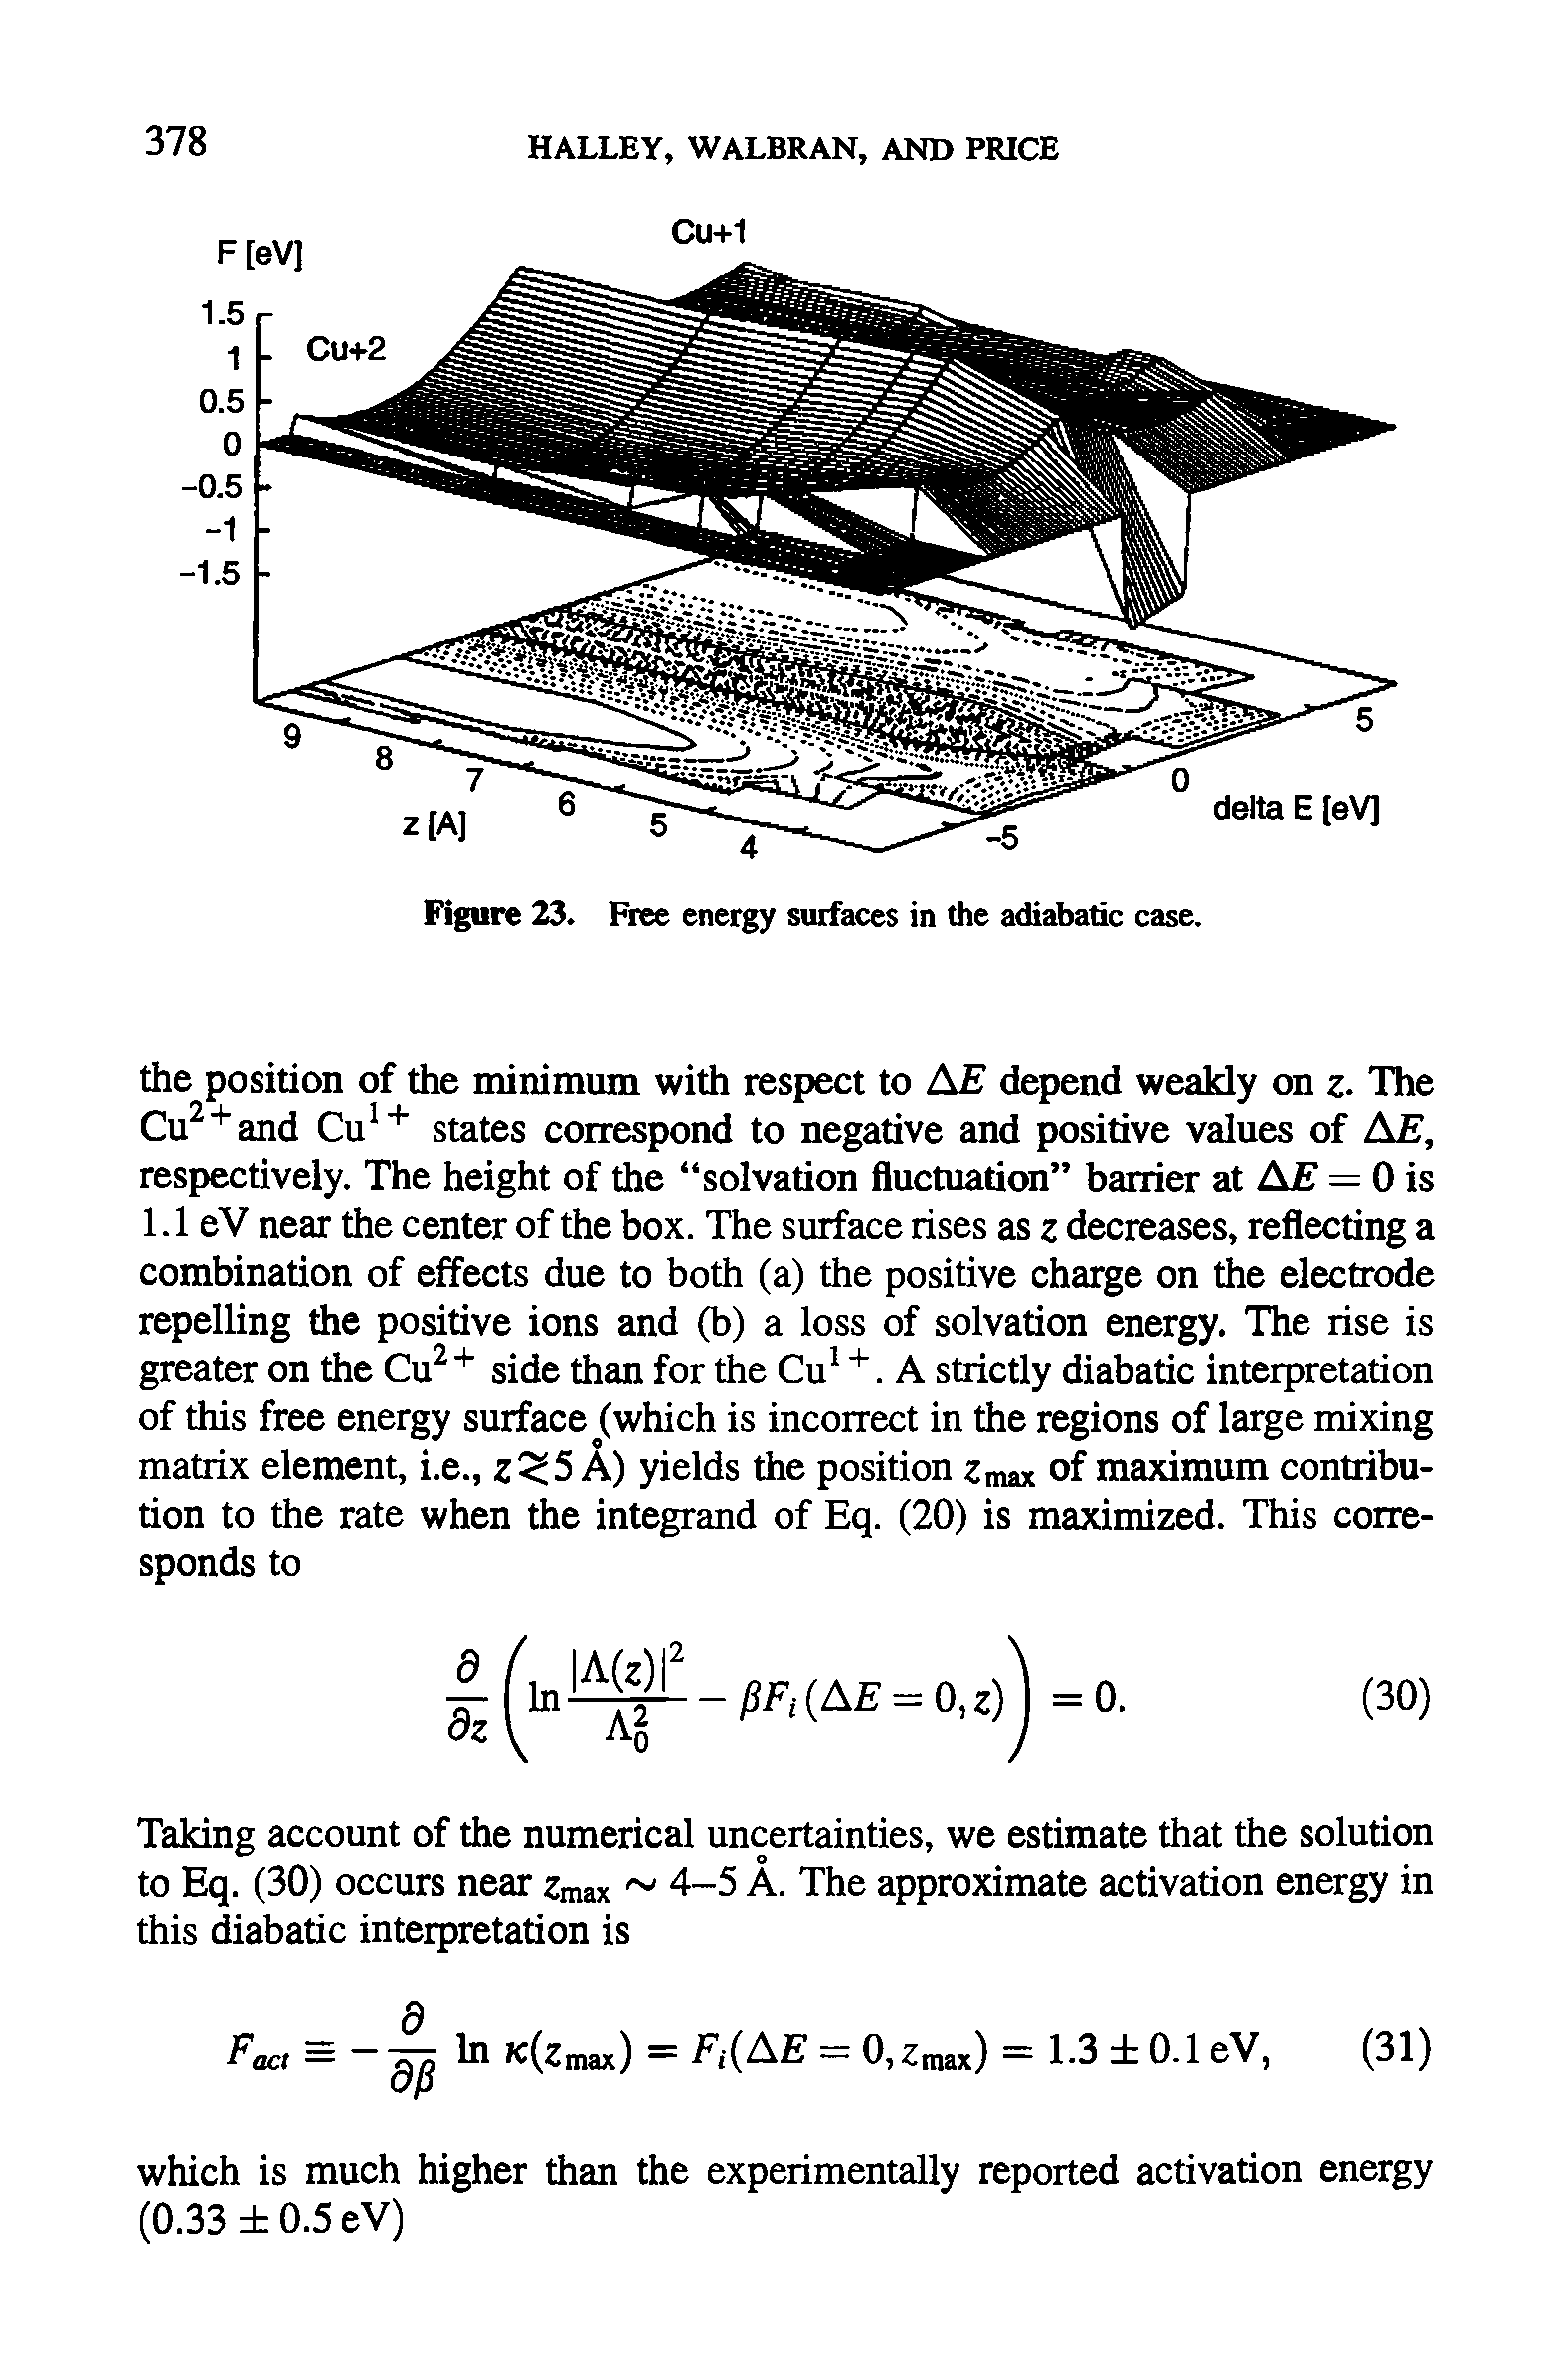 Figure 23. Free energy surfaces in the adiabatic case.